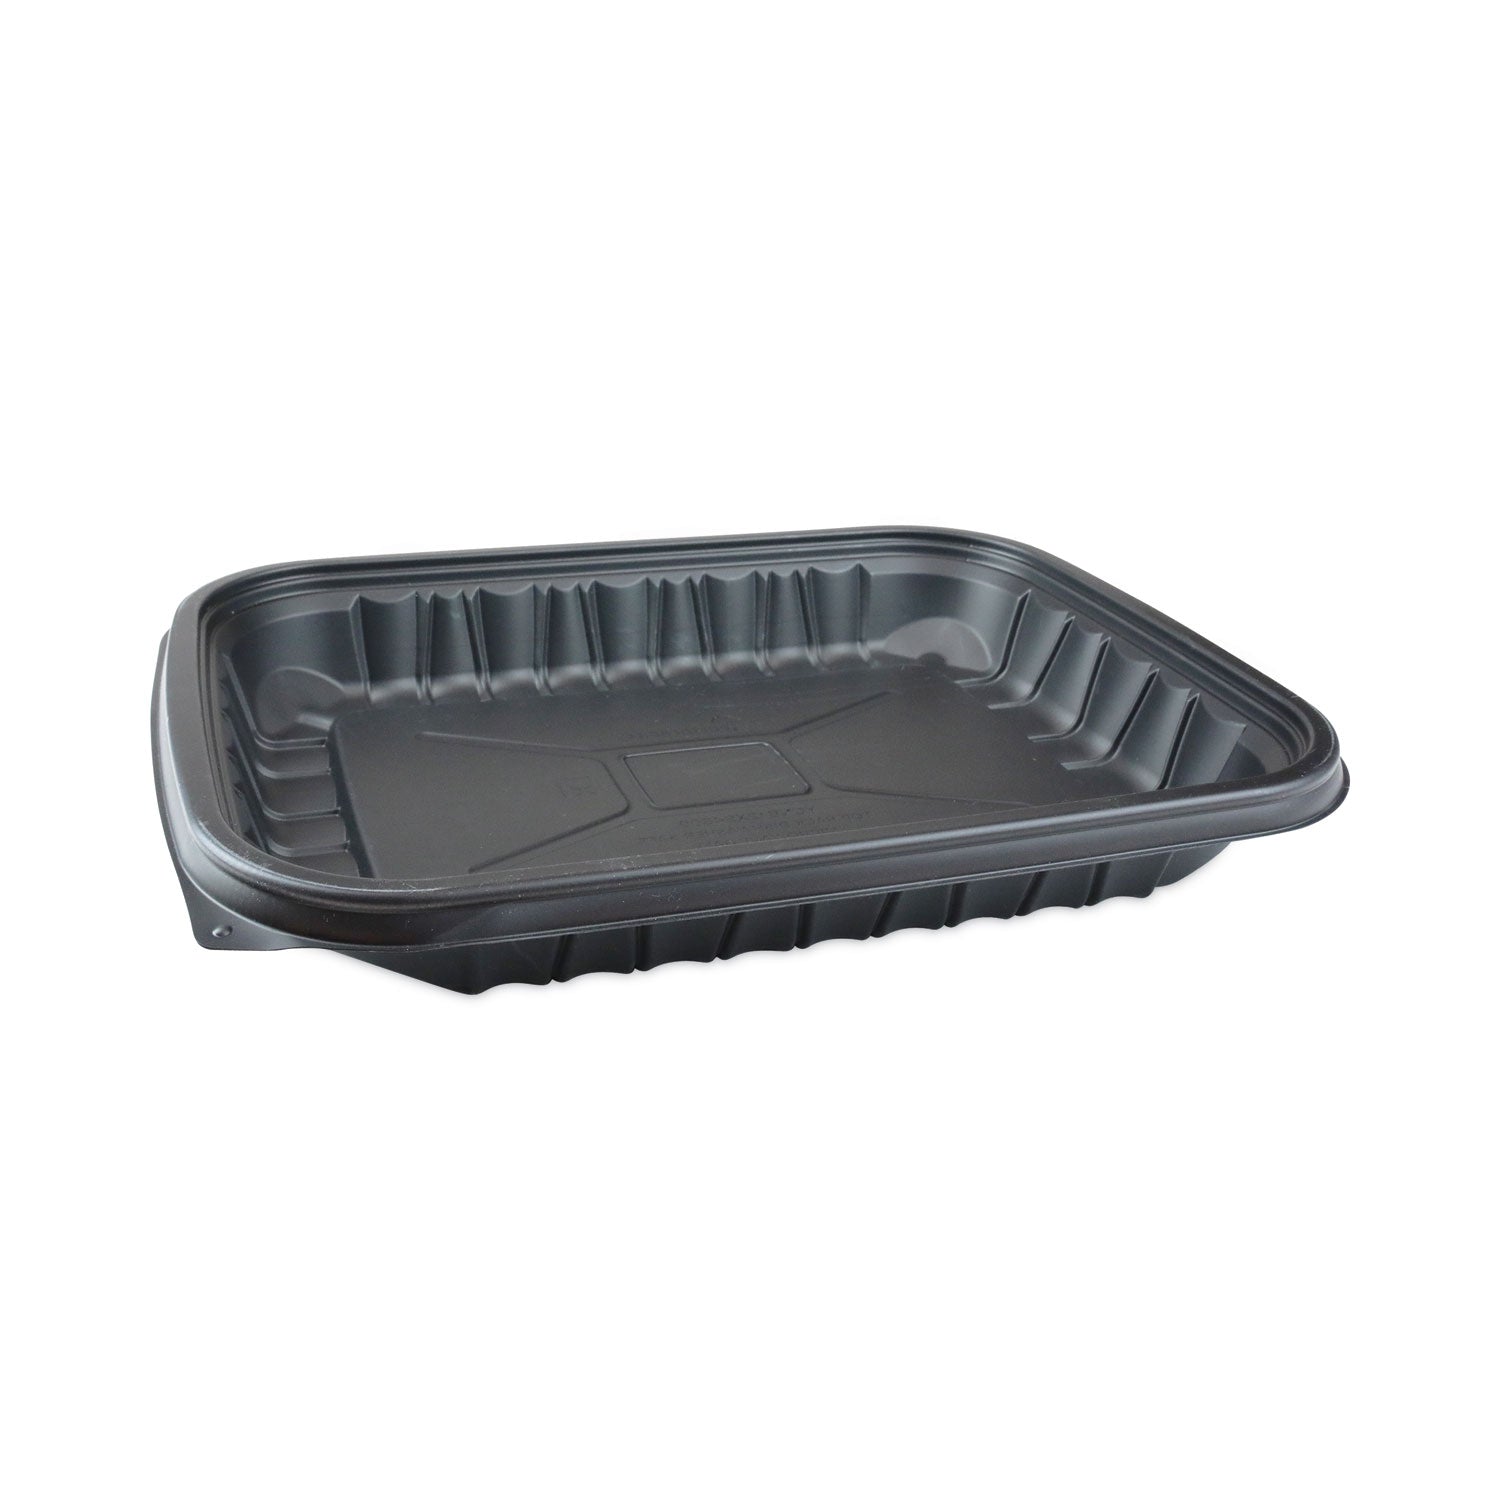 earthchoice-entree2go-takeout-container-48-oz-1175-x-875-x-161-black-plastic-200-carton_pctycnb12x94800 - 1